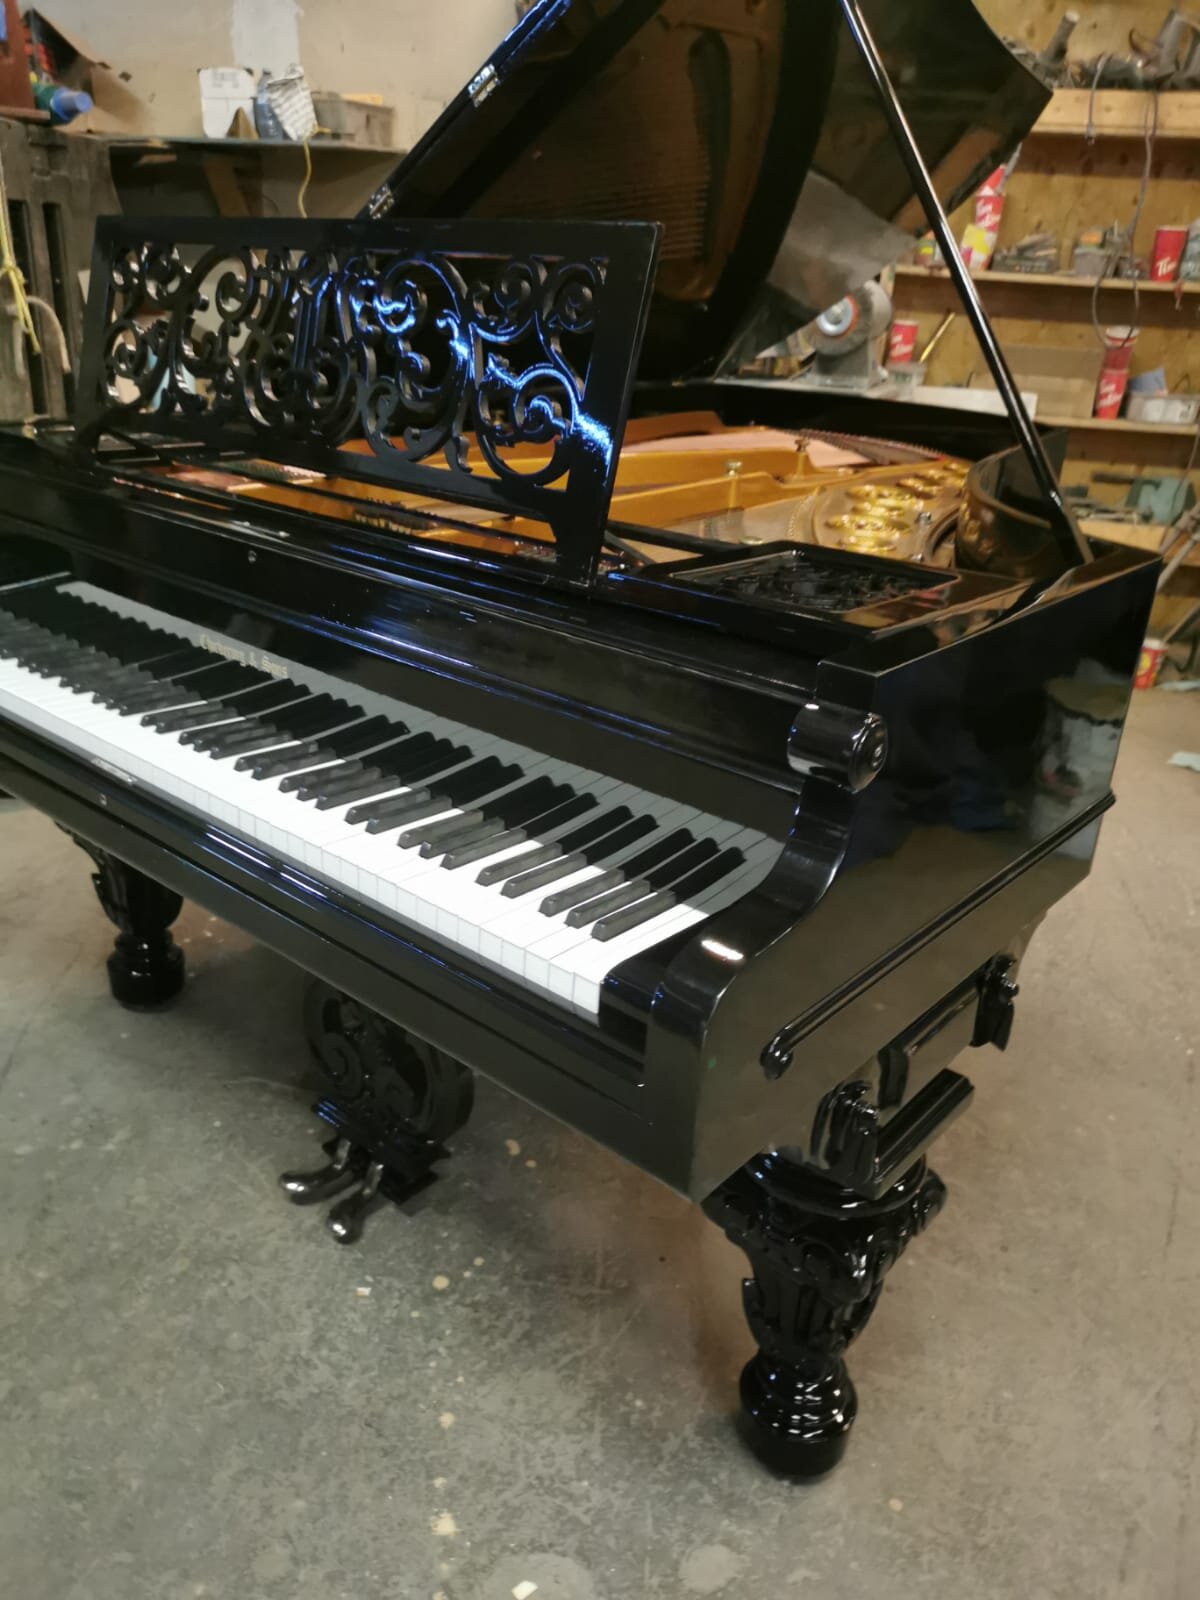 Chickering piano for sale.jpeg